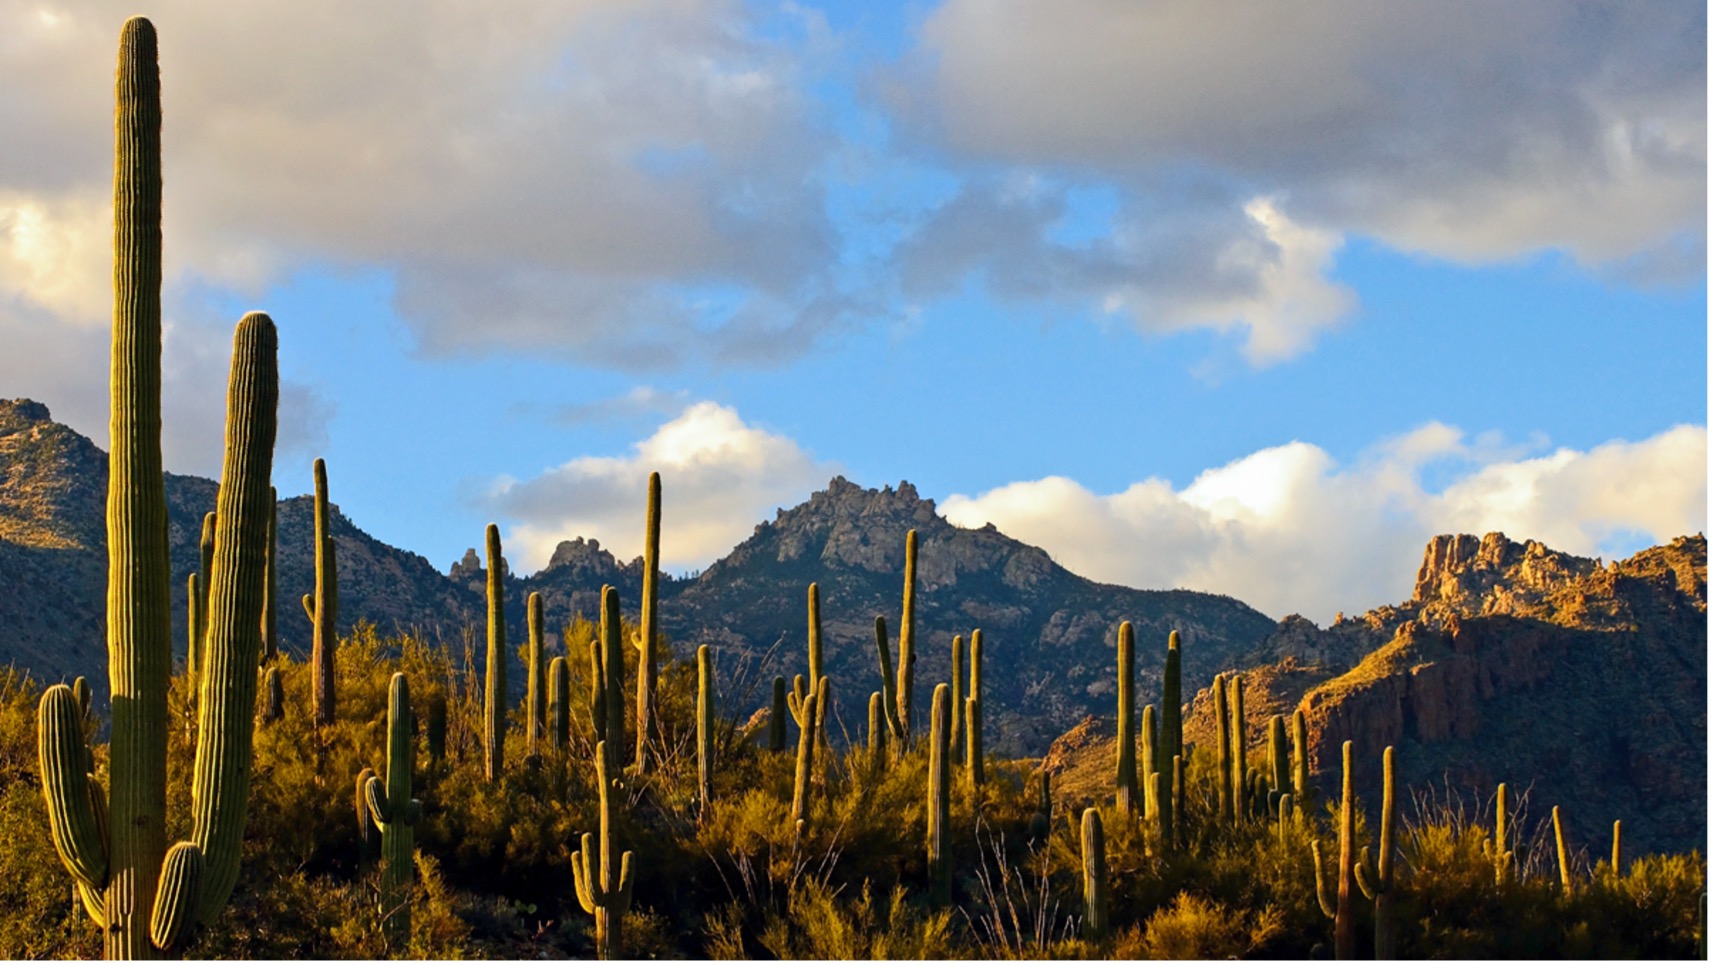 Cacti in front of a mountain in the Arizona desert